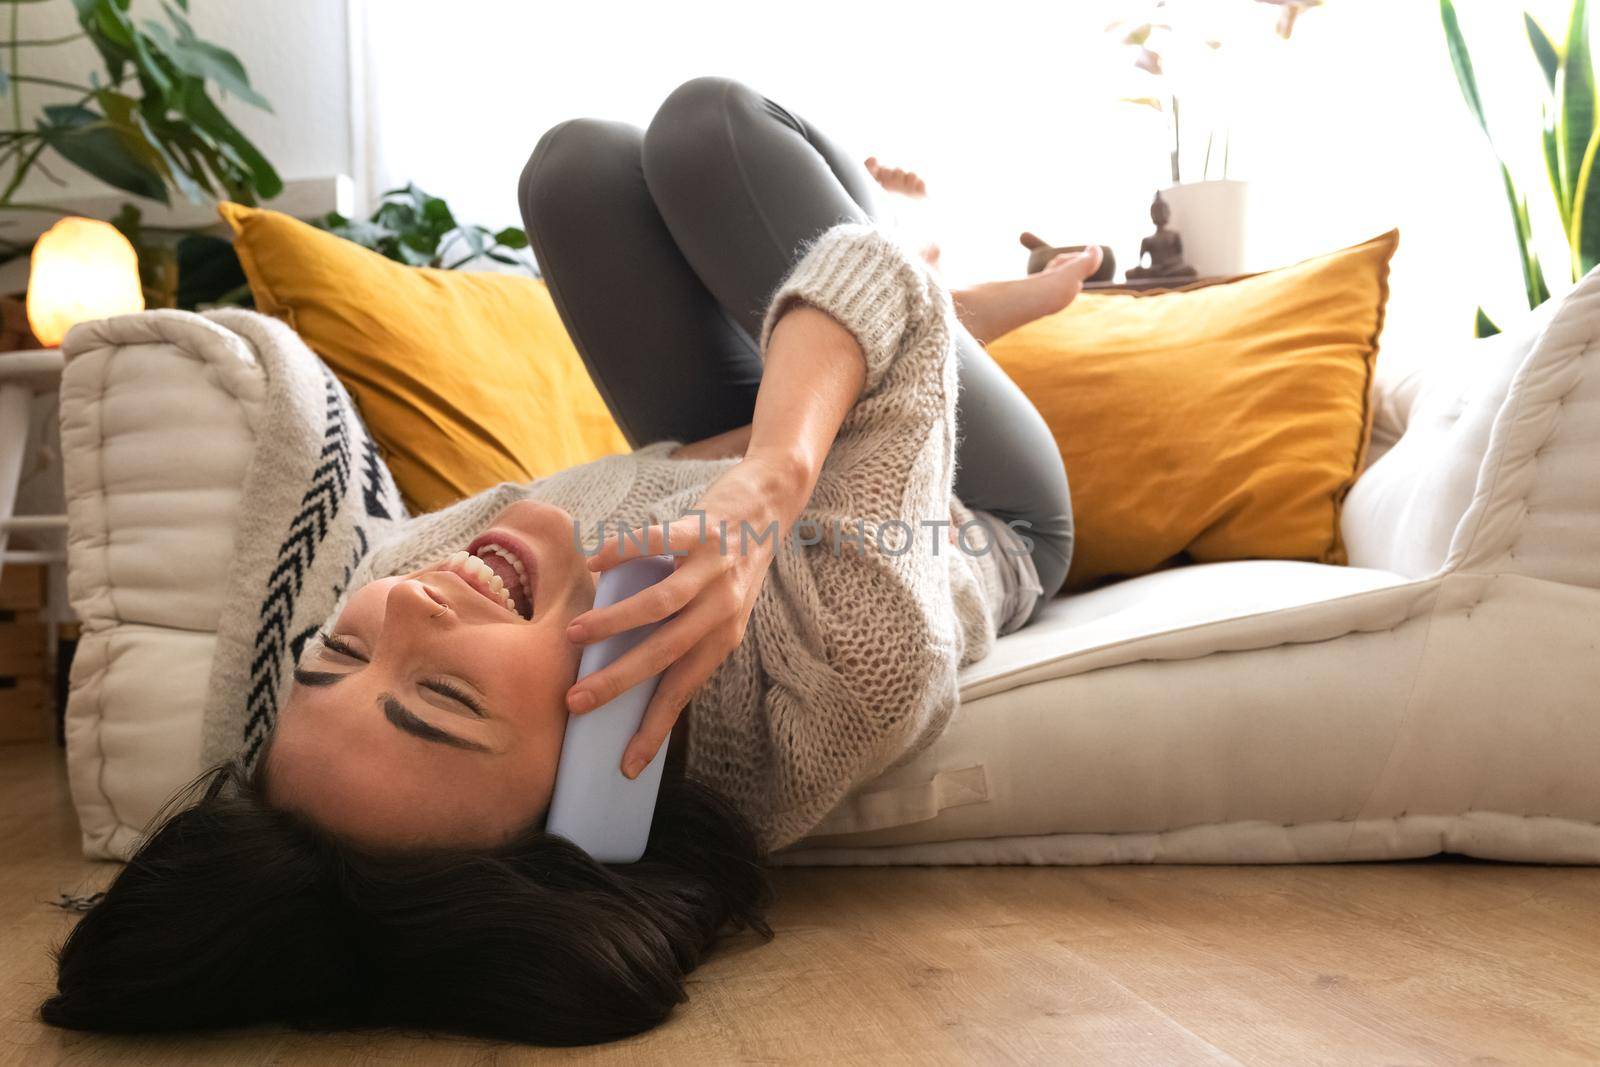 Happy young caucasian woman lying upside down on the couch talking on cellphone laughing. Copy space. by Hoverstock